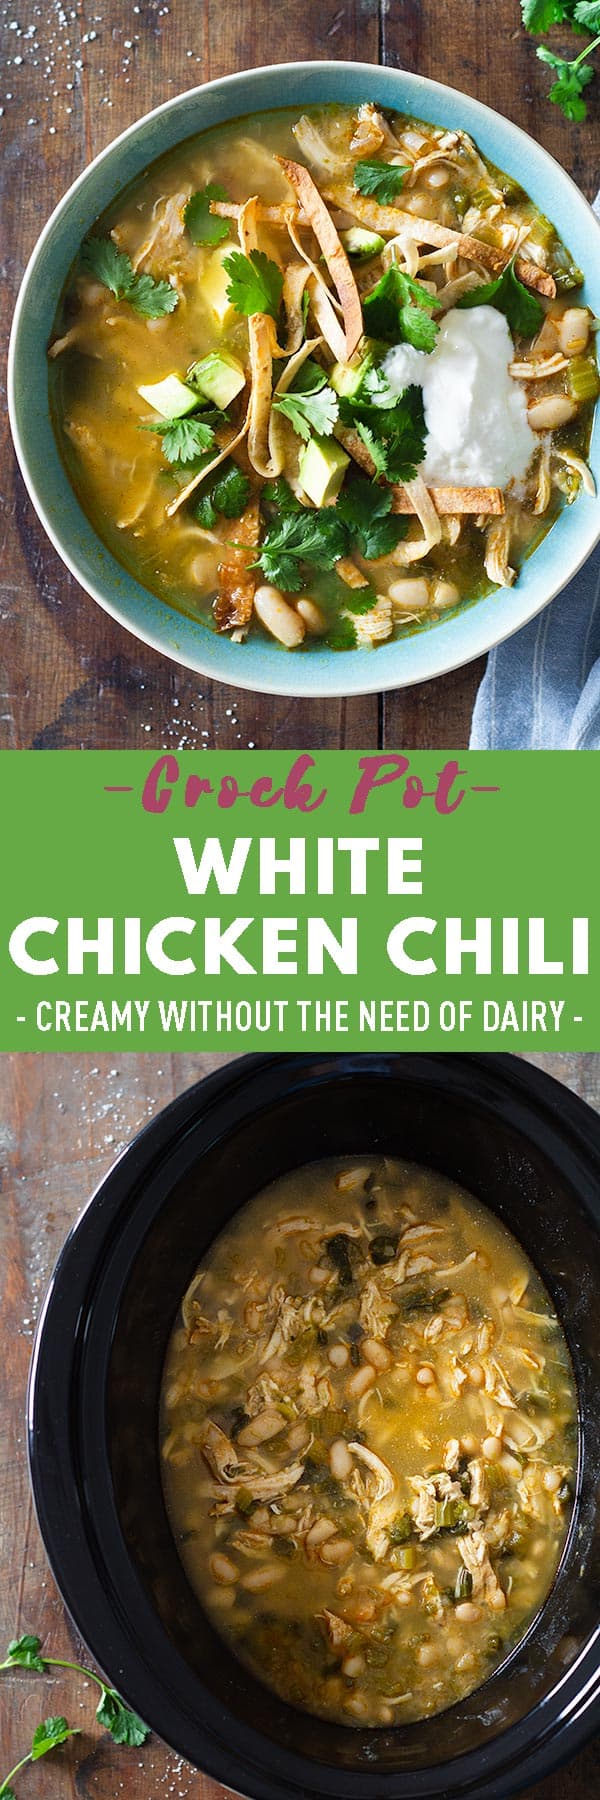 Crock Pot White Chicken Chili - Green Healthy Cooking